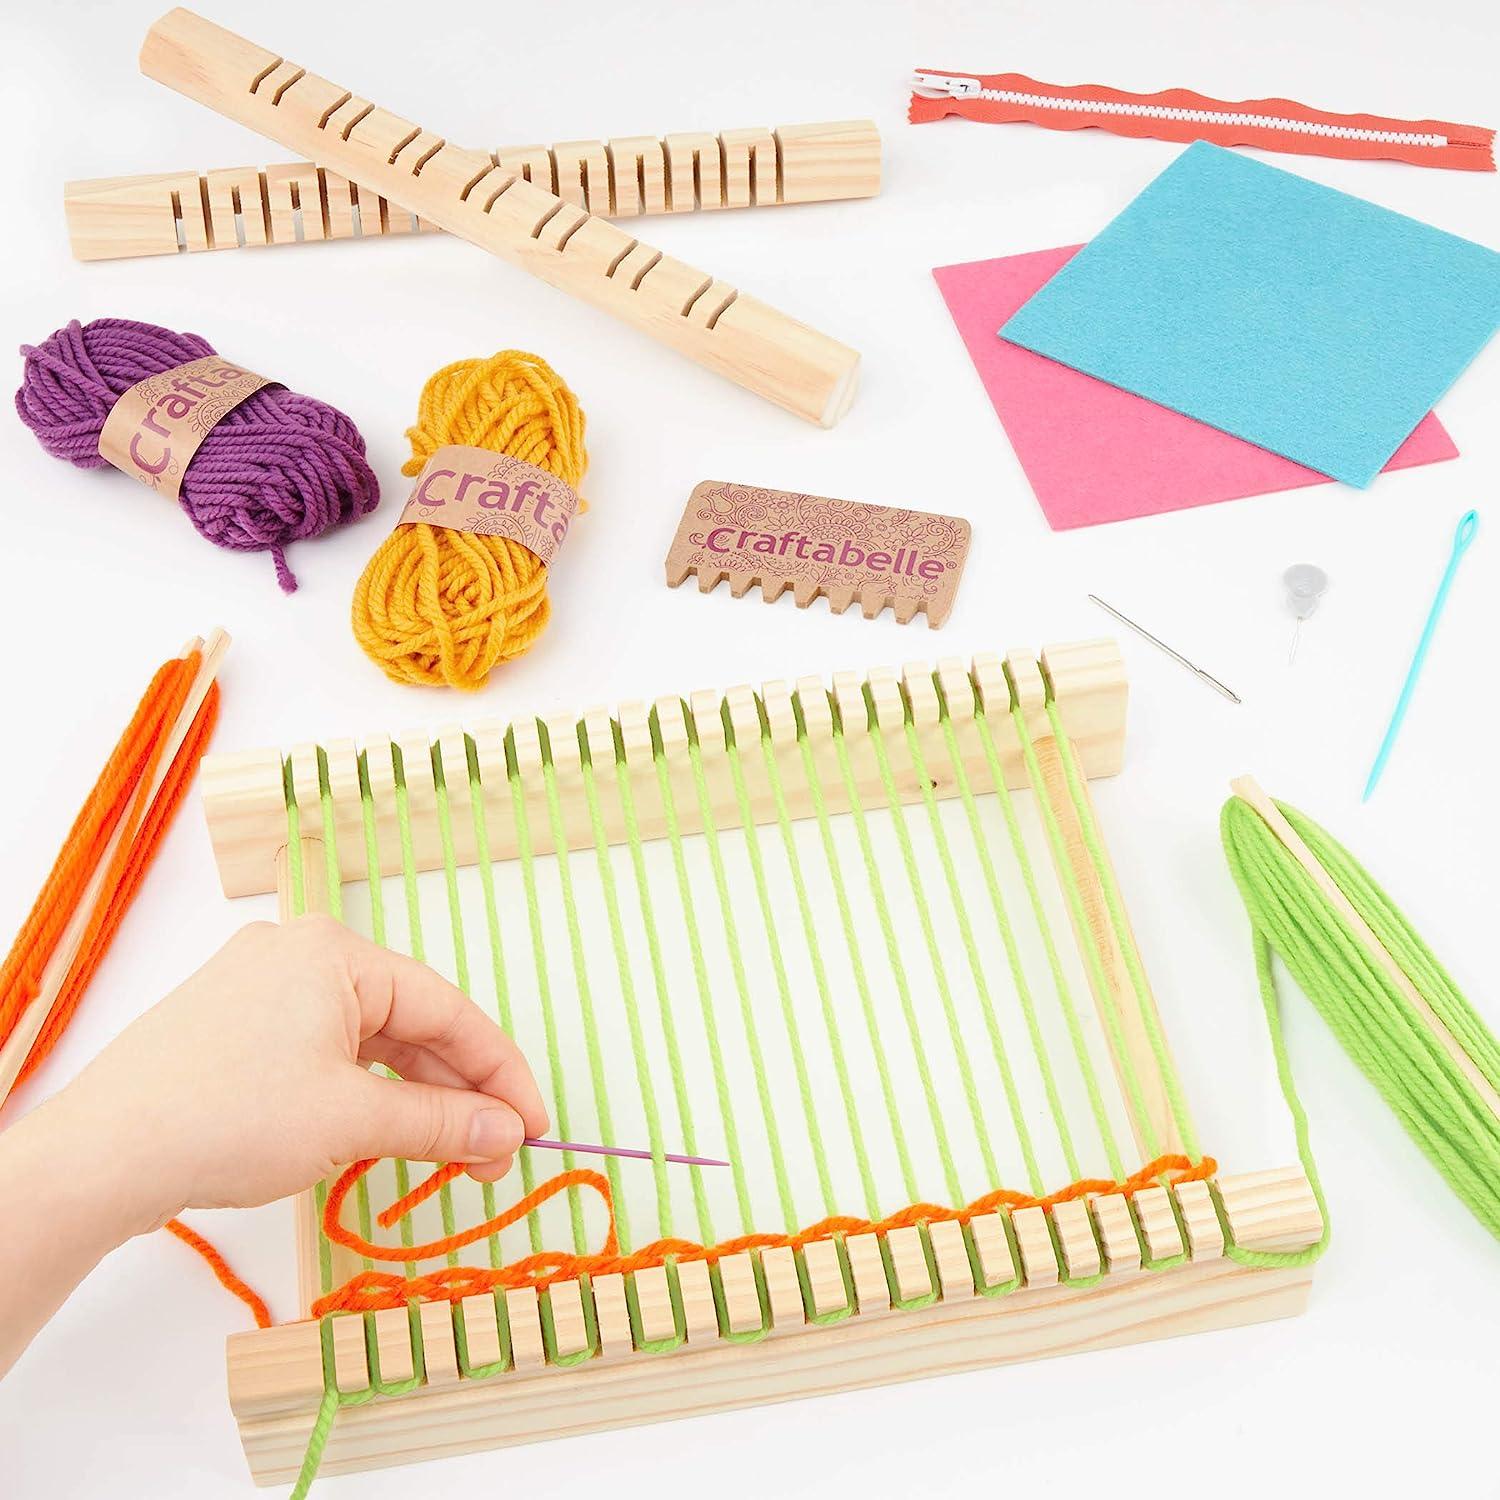 Boye Simplicity Learn to Loom Kit for Beginners, 10pc